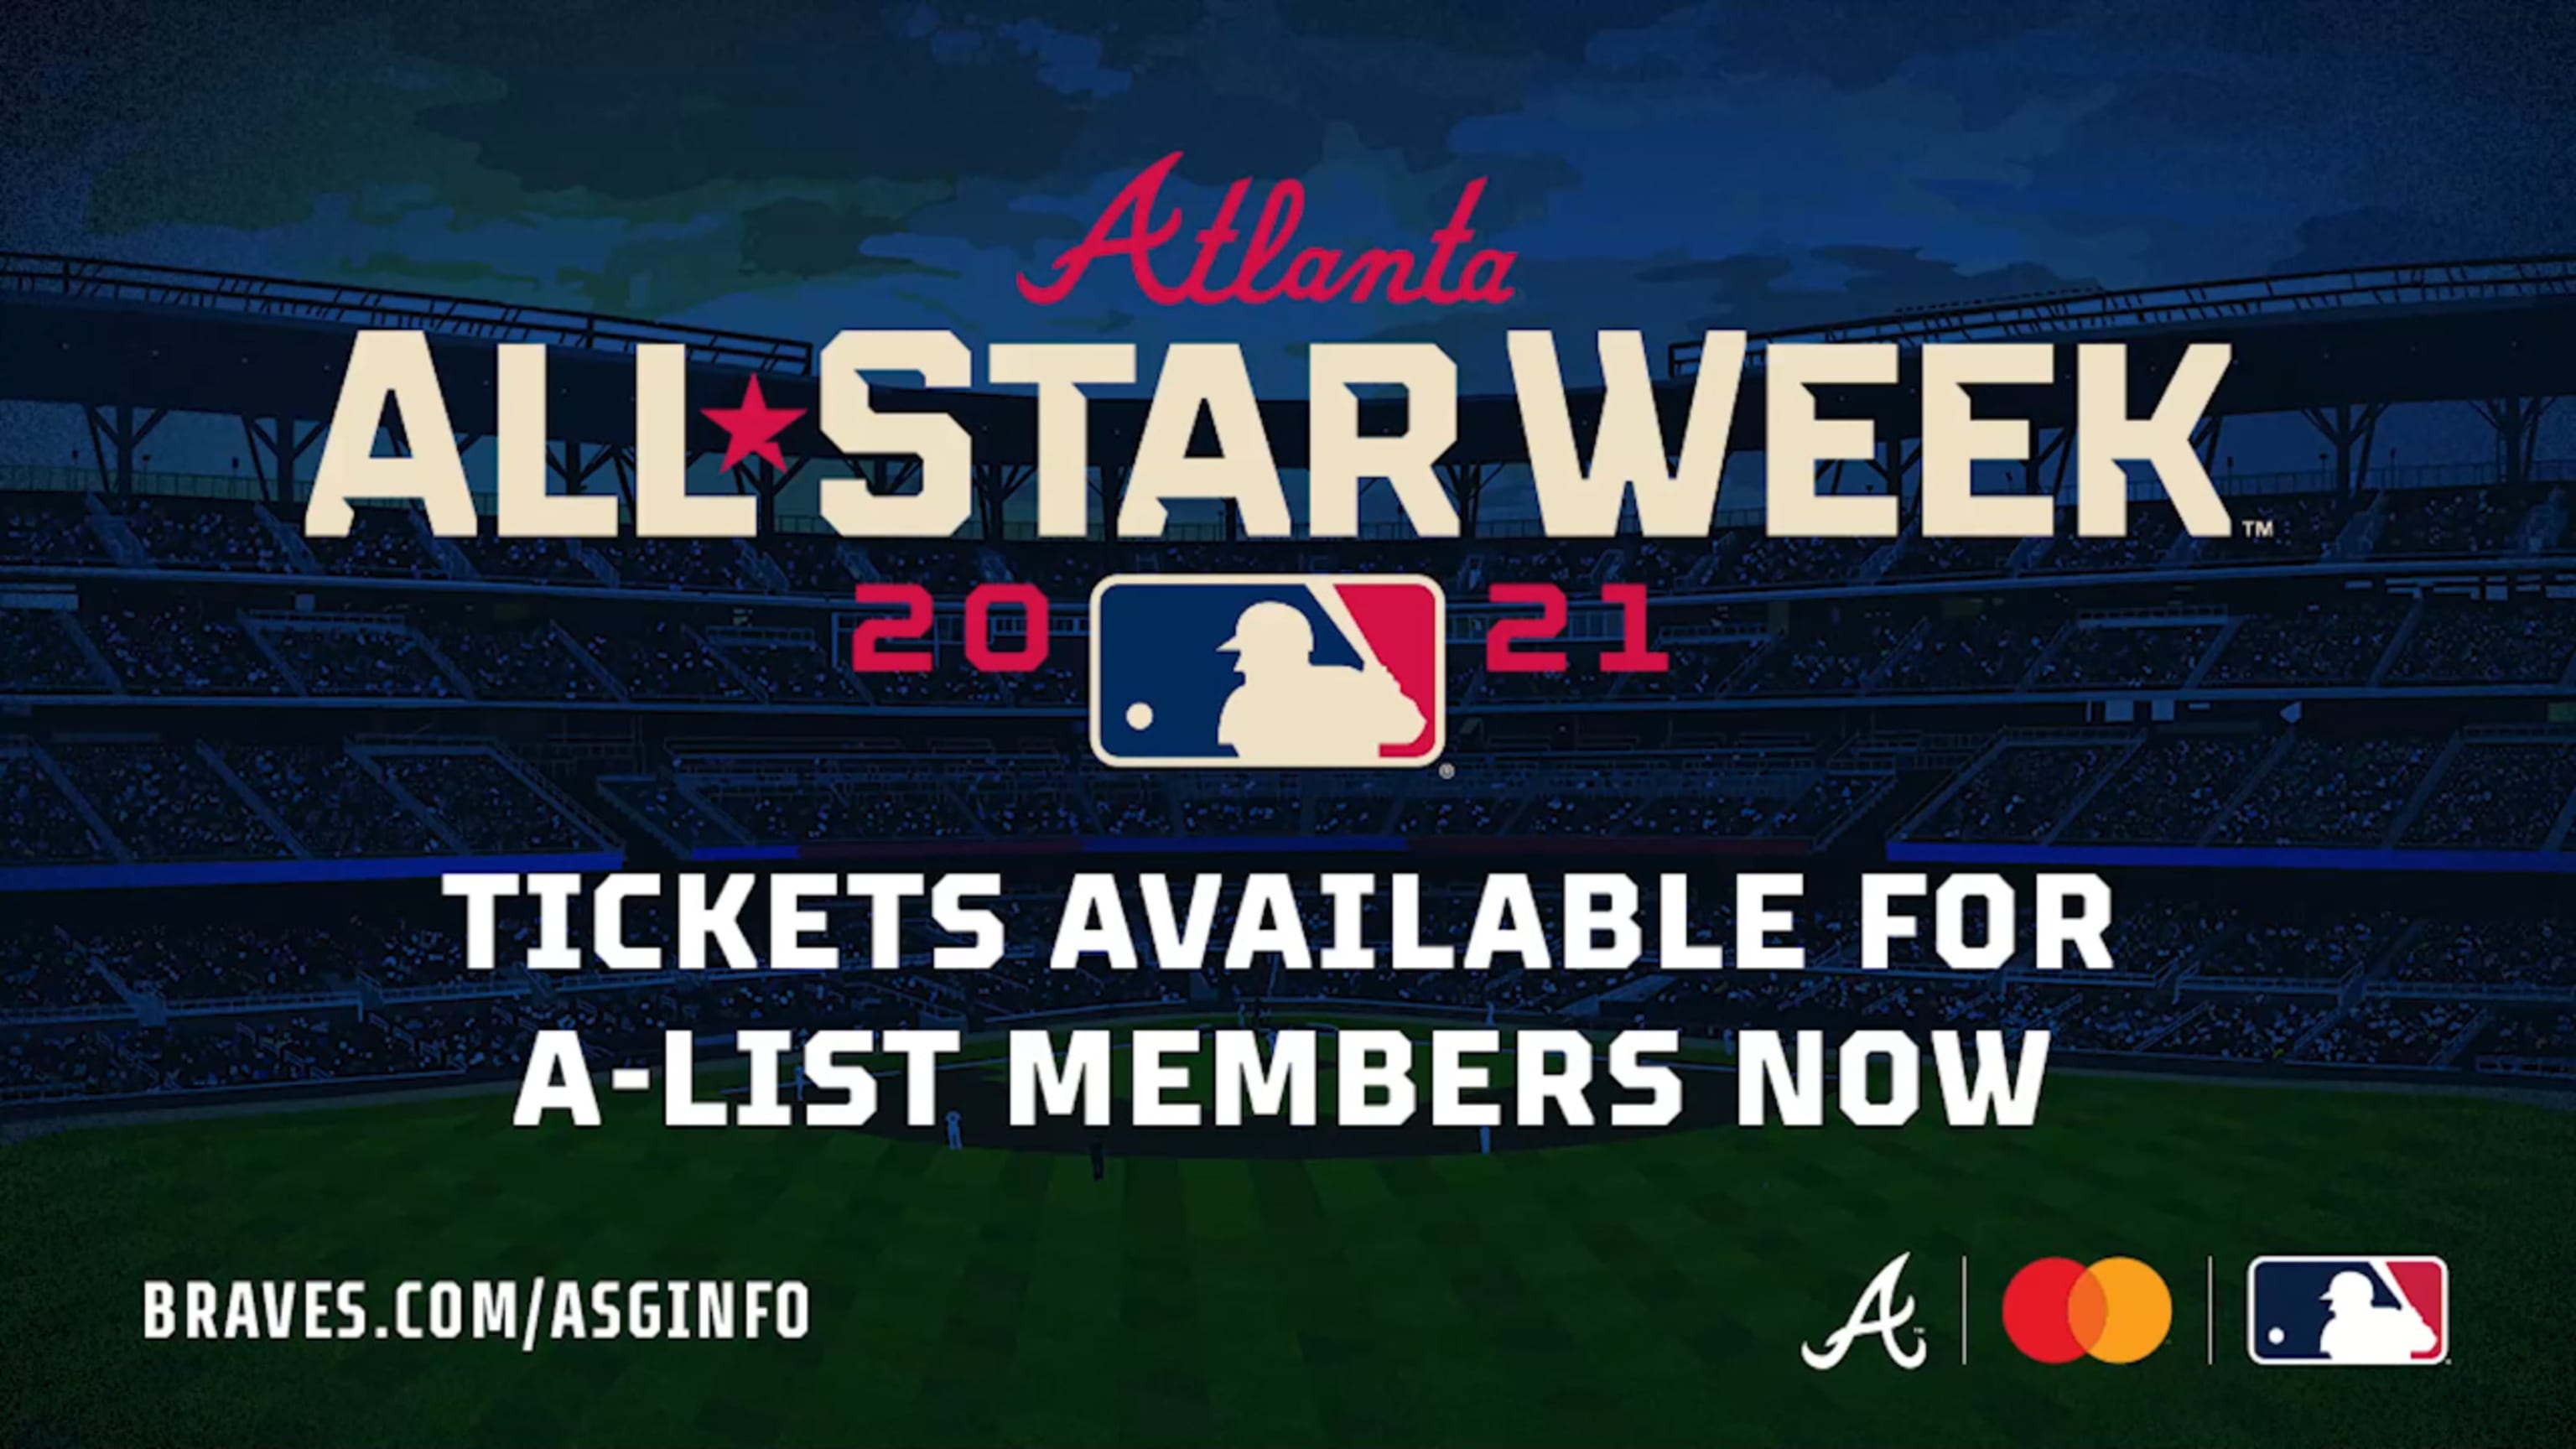 2021 MLB All-Star Week Events